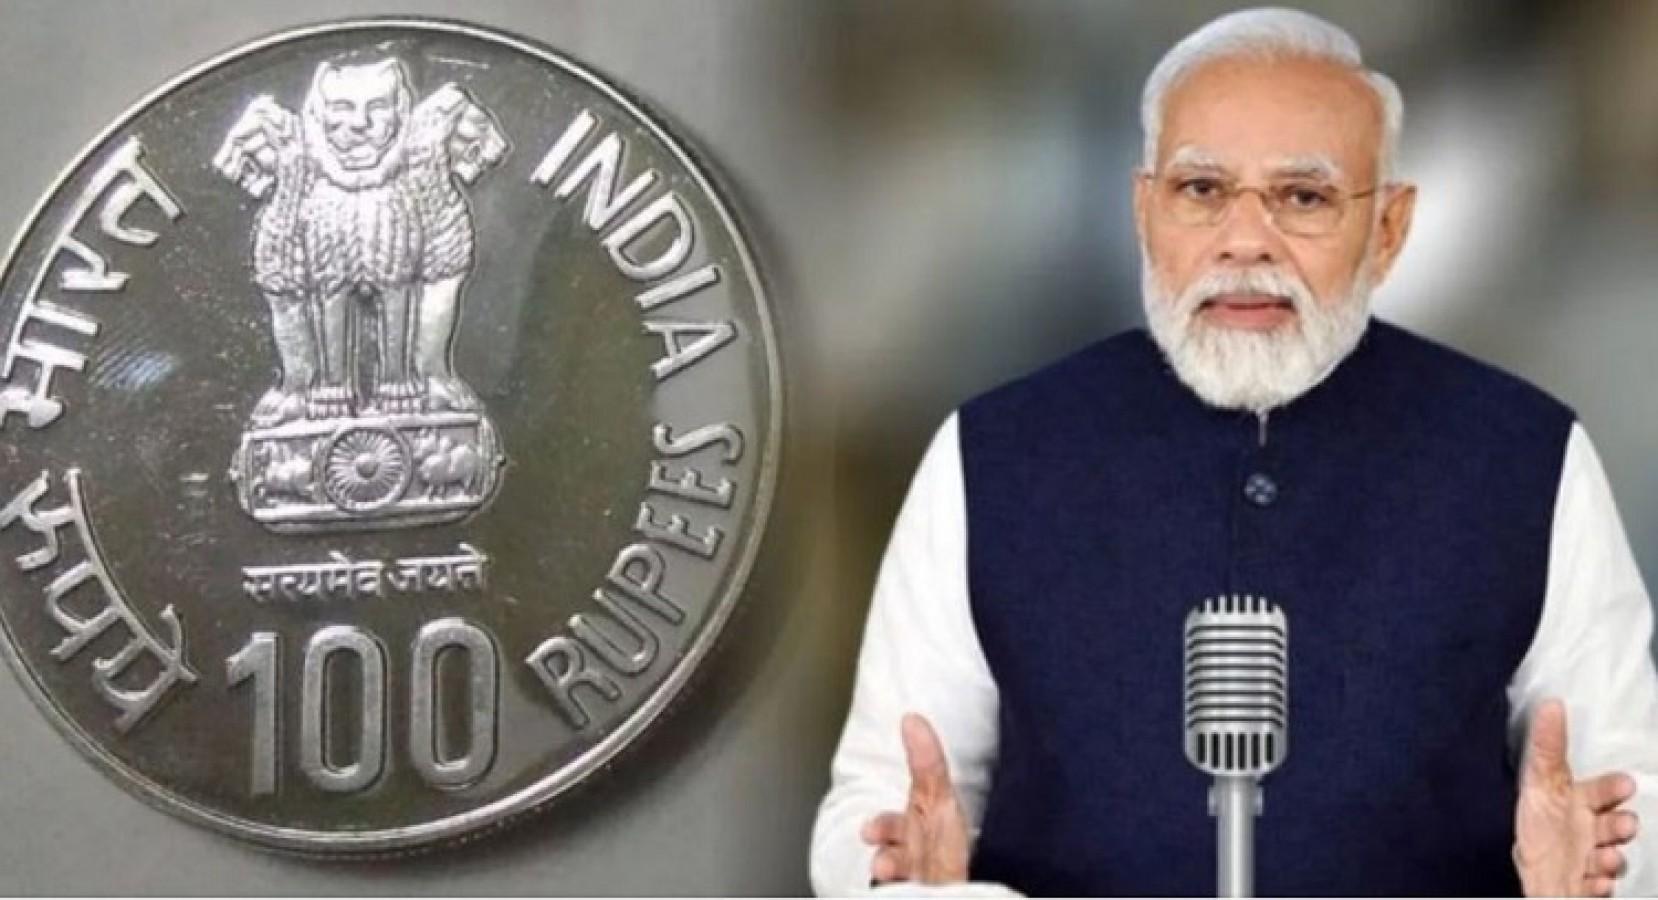 Mann Ki Baat 100th episode: Rs 100 coin to be released on the occasion_40.1